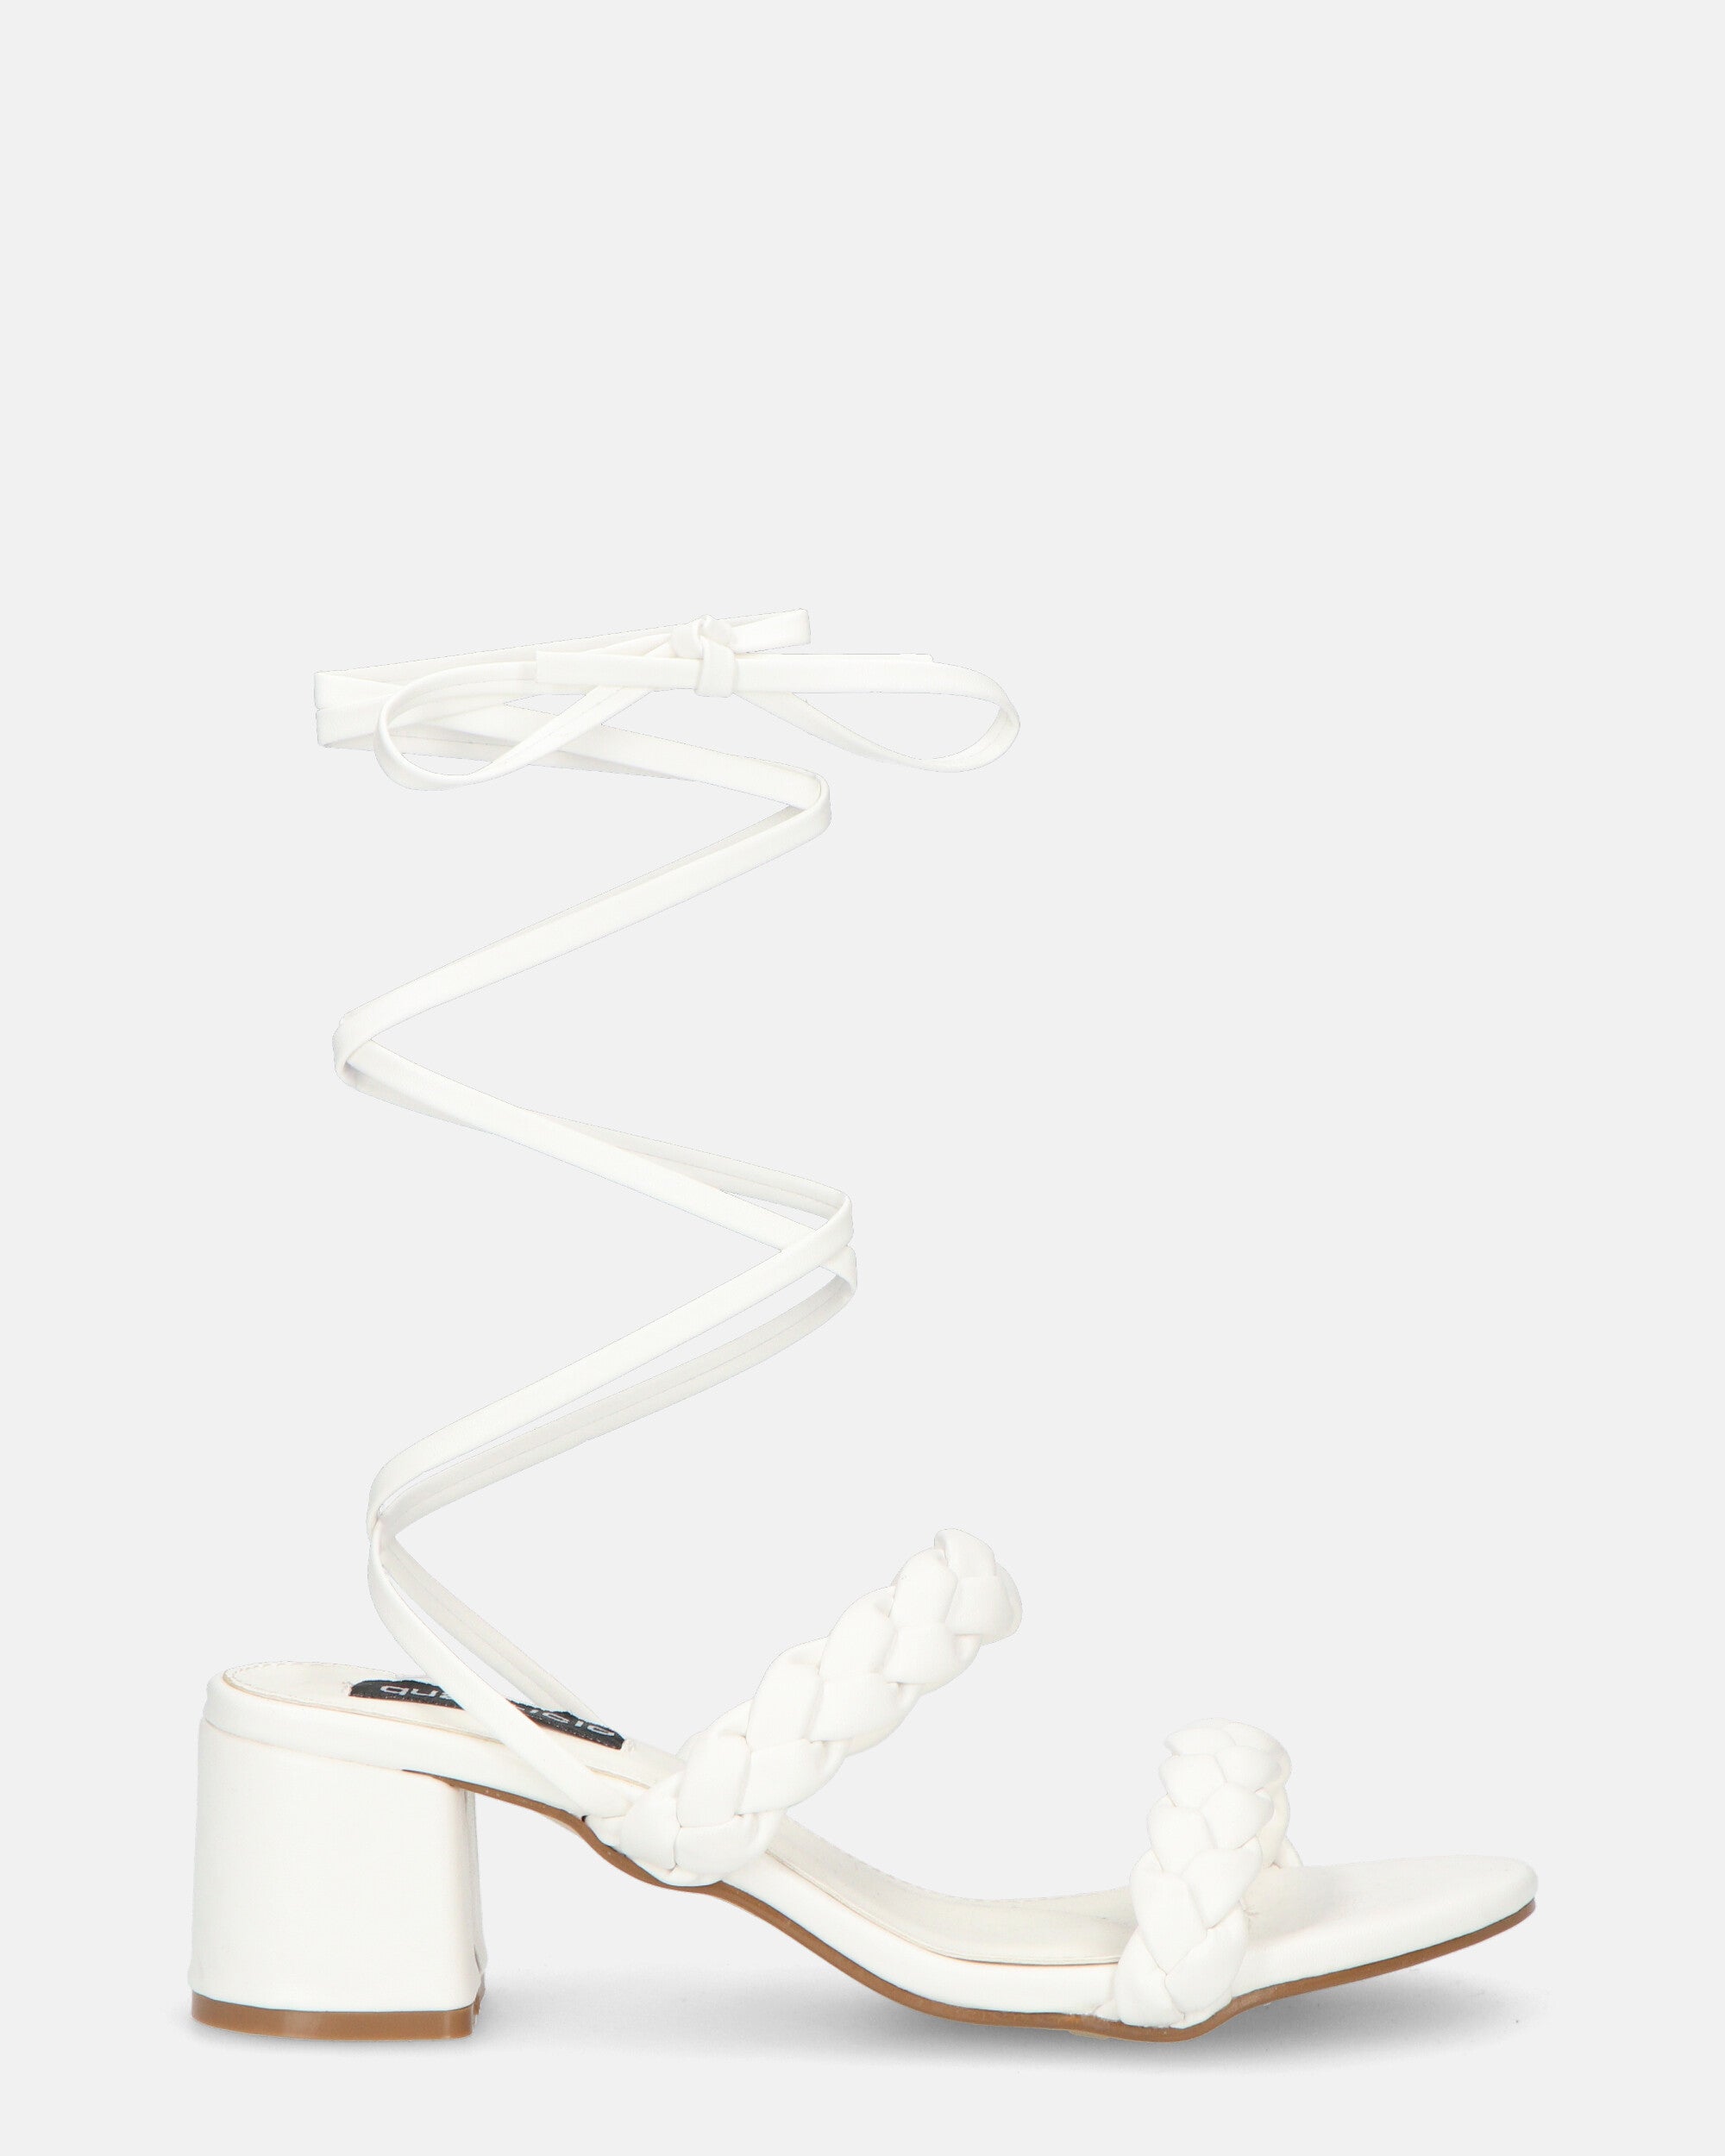 TARISAI - white faux leather sandals with laces